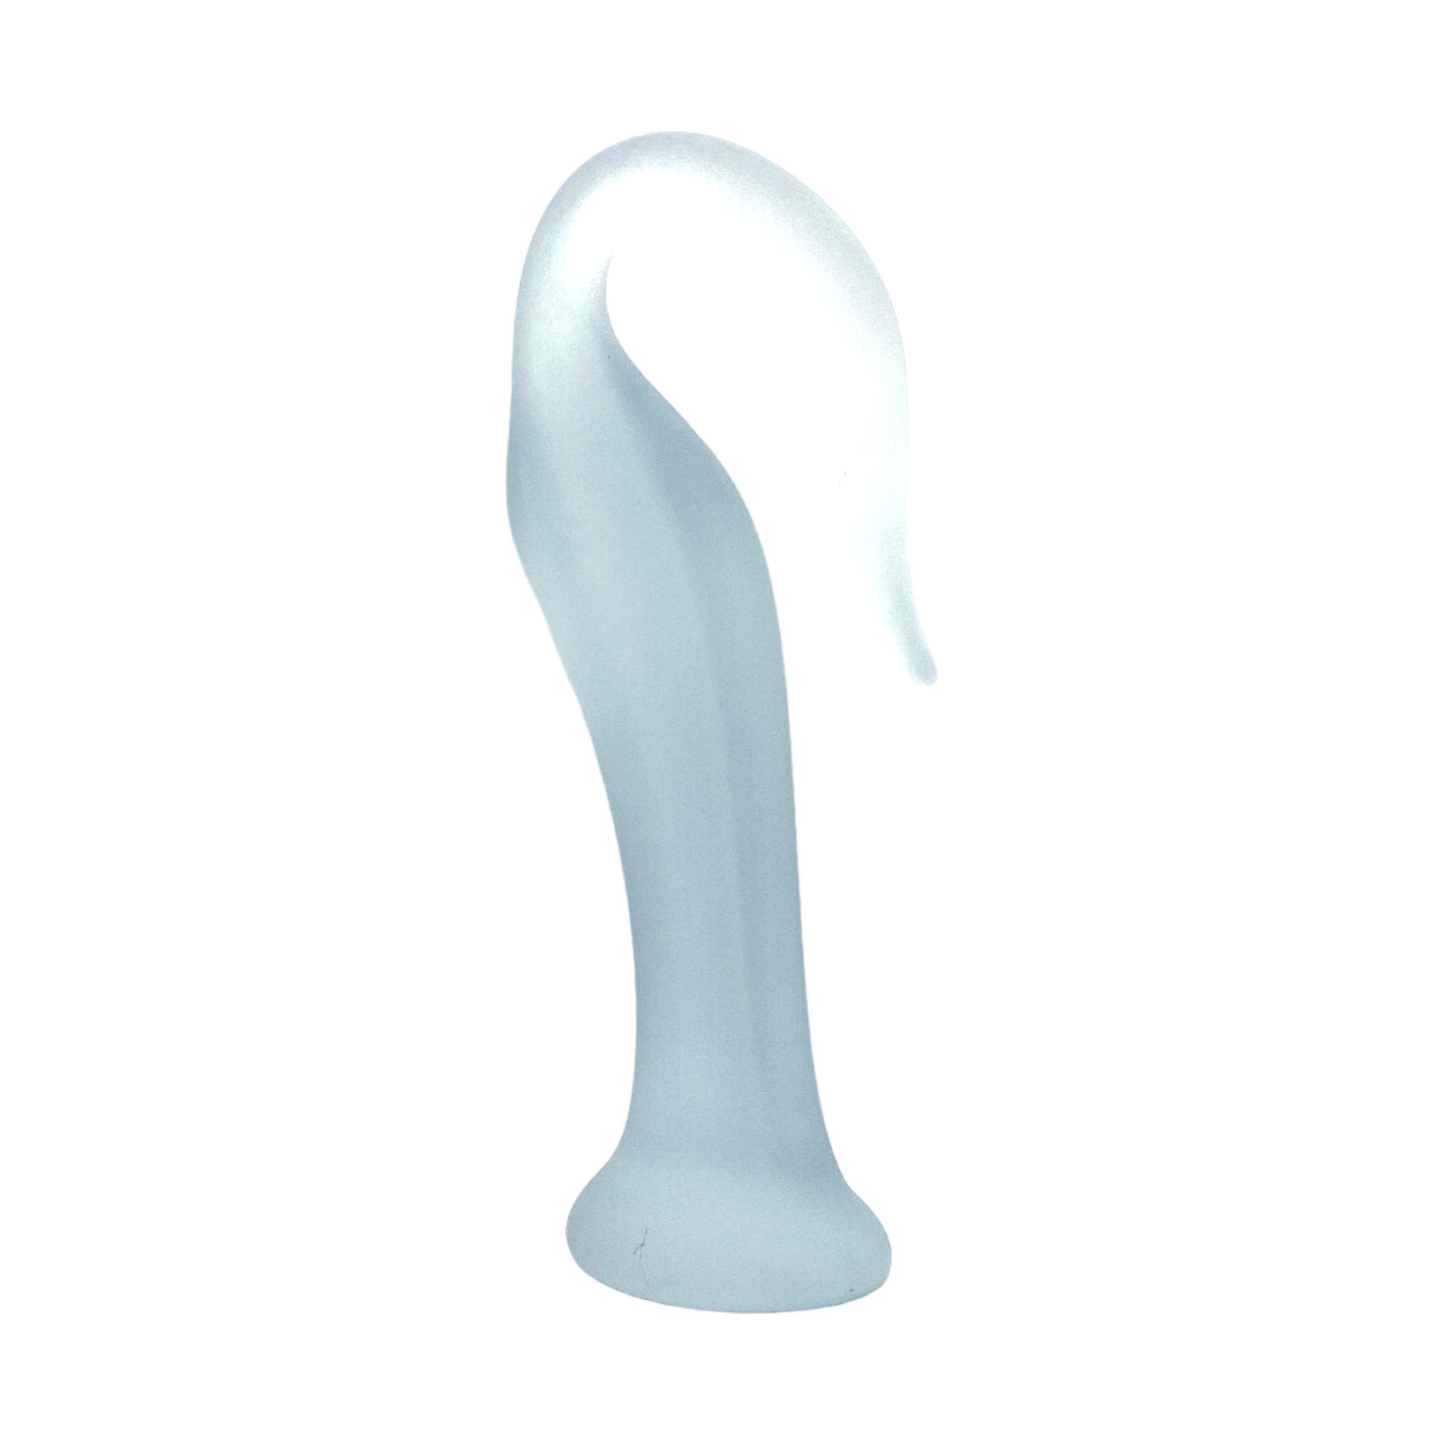 Ethereal Elegance: Handcrafted 15" Frosted Glass Swan